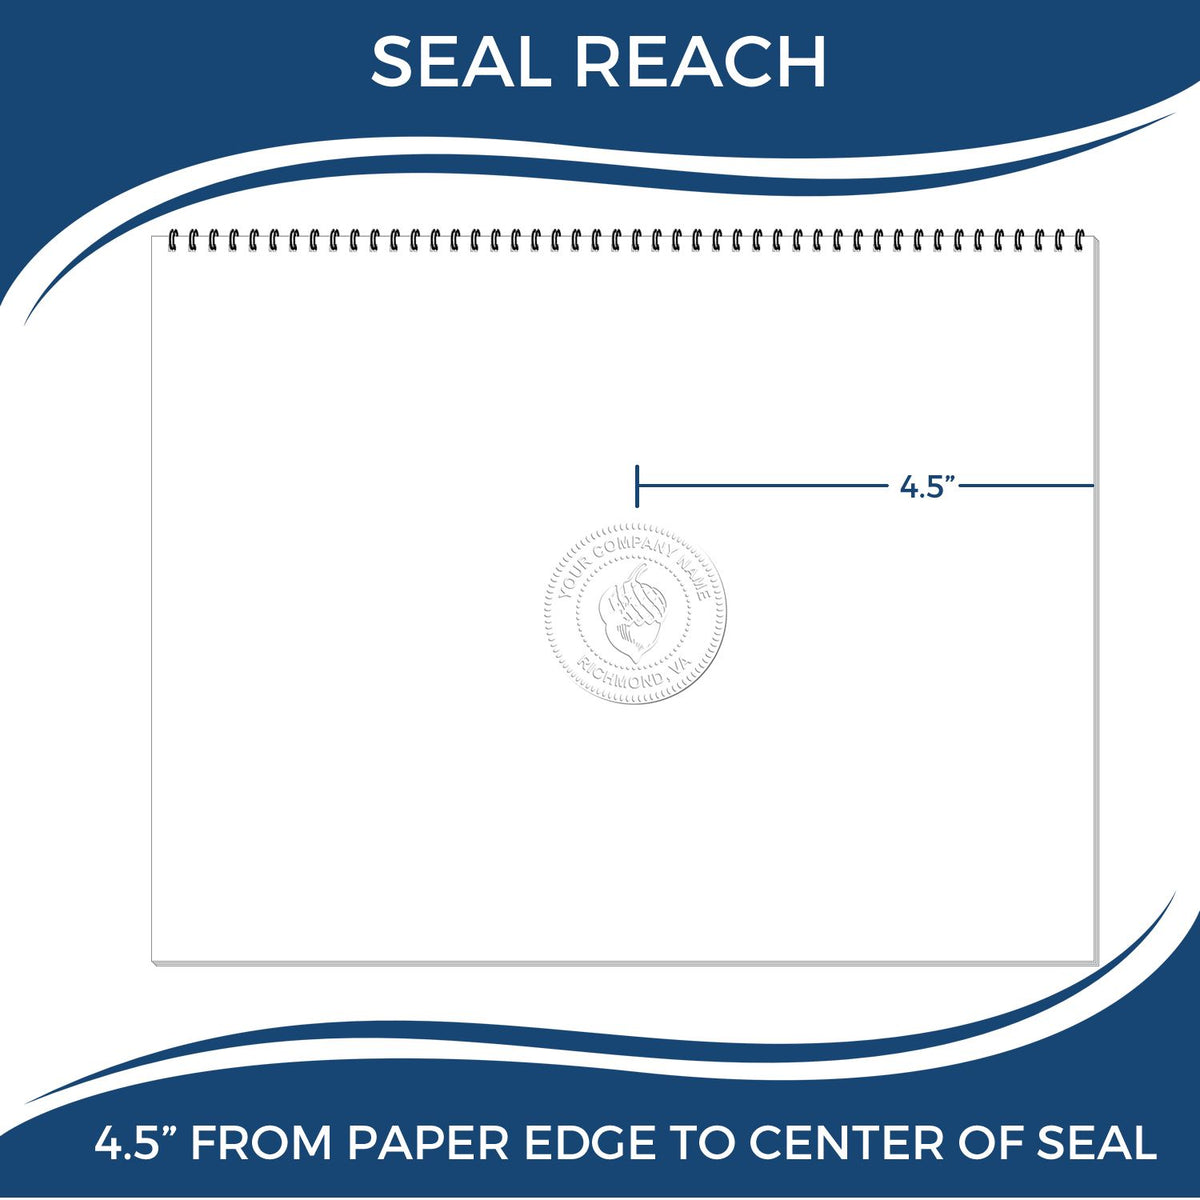 An infographic showing the seal reach which is represented by a ruler and a miniature seal image of the State of Oklahoma Extended Long Reach Engineer Seal